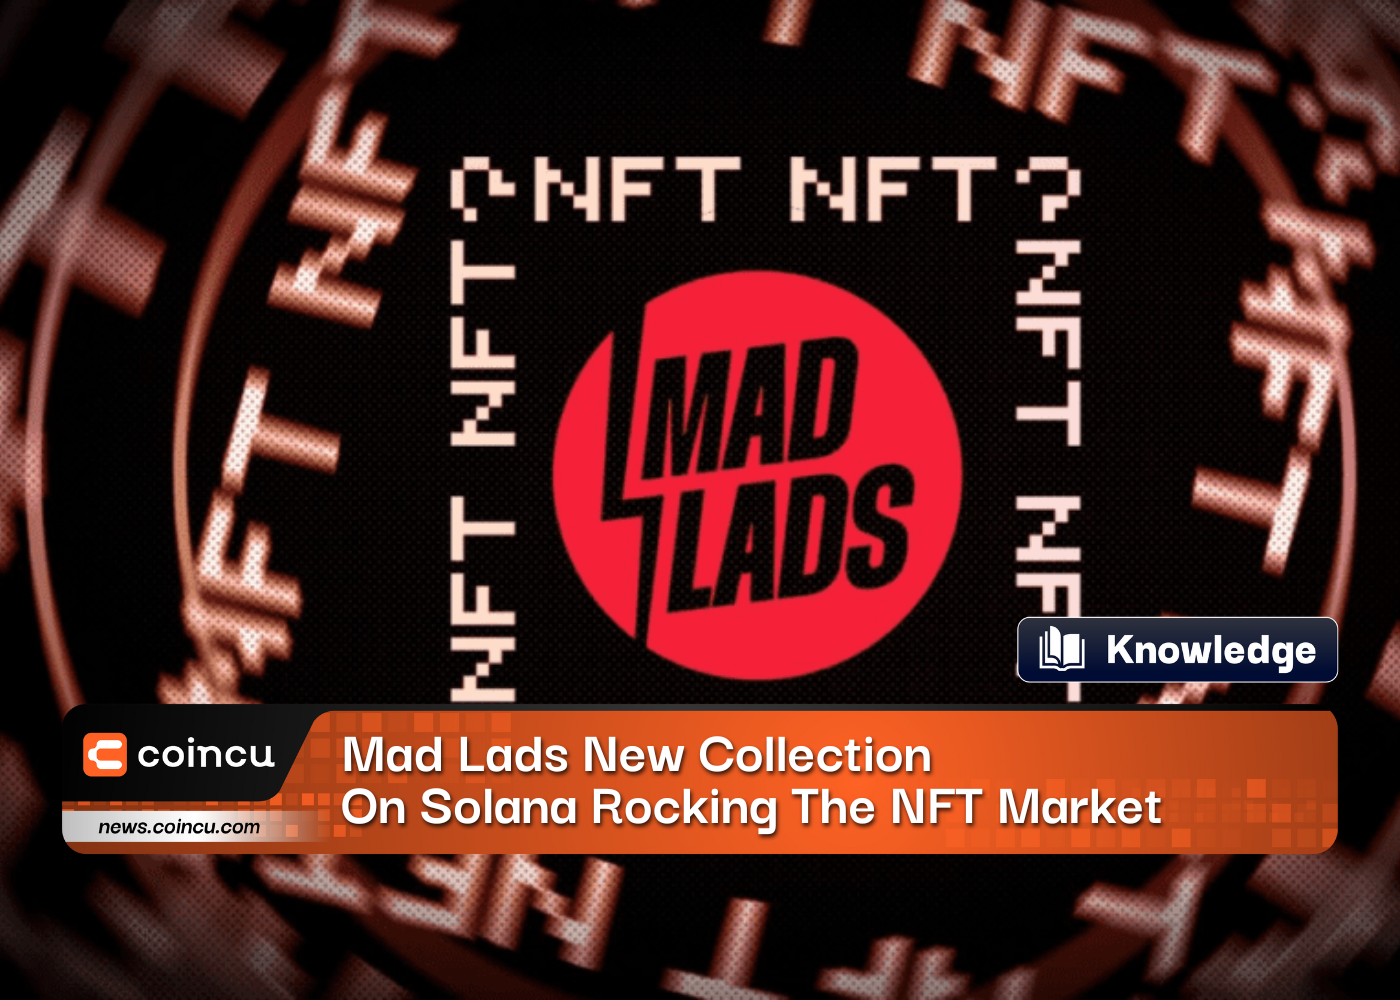 Mad Lads New Collection On Solana Rocking The NFT Market